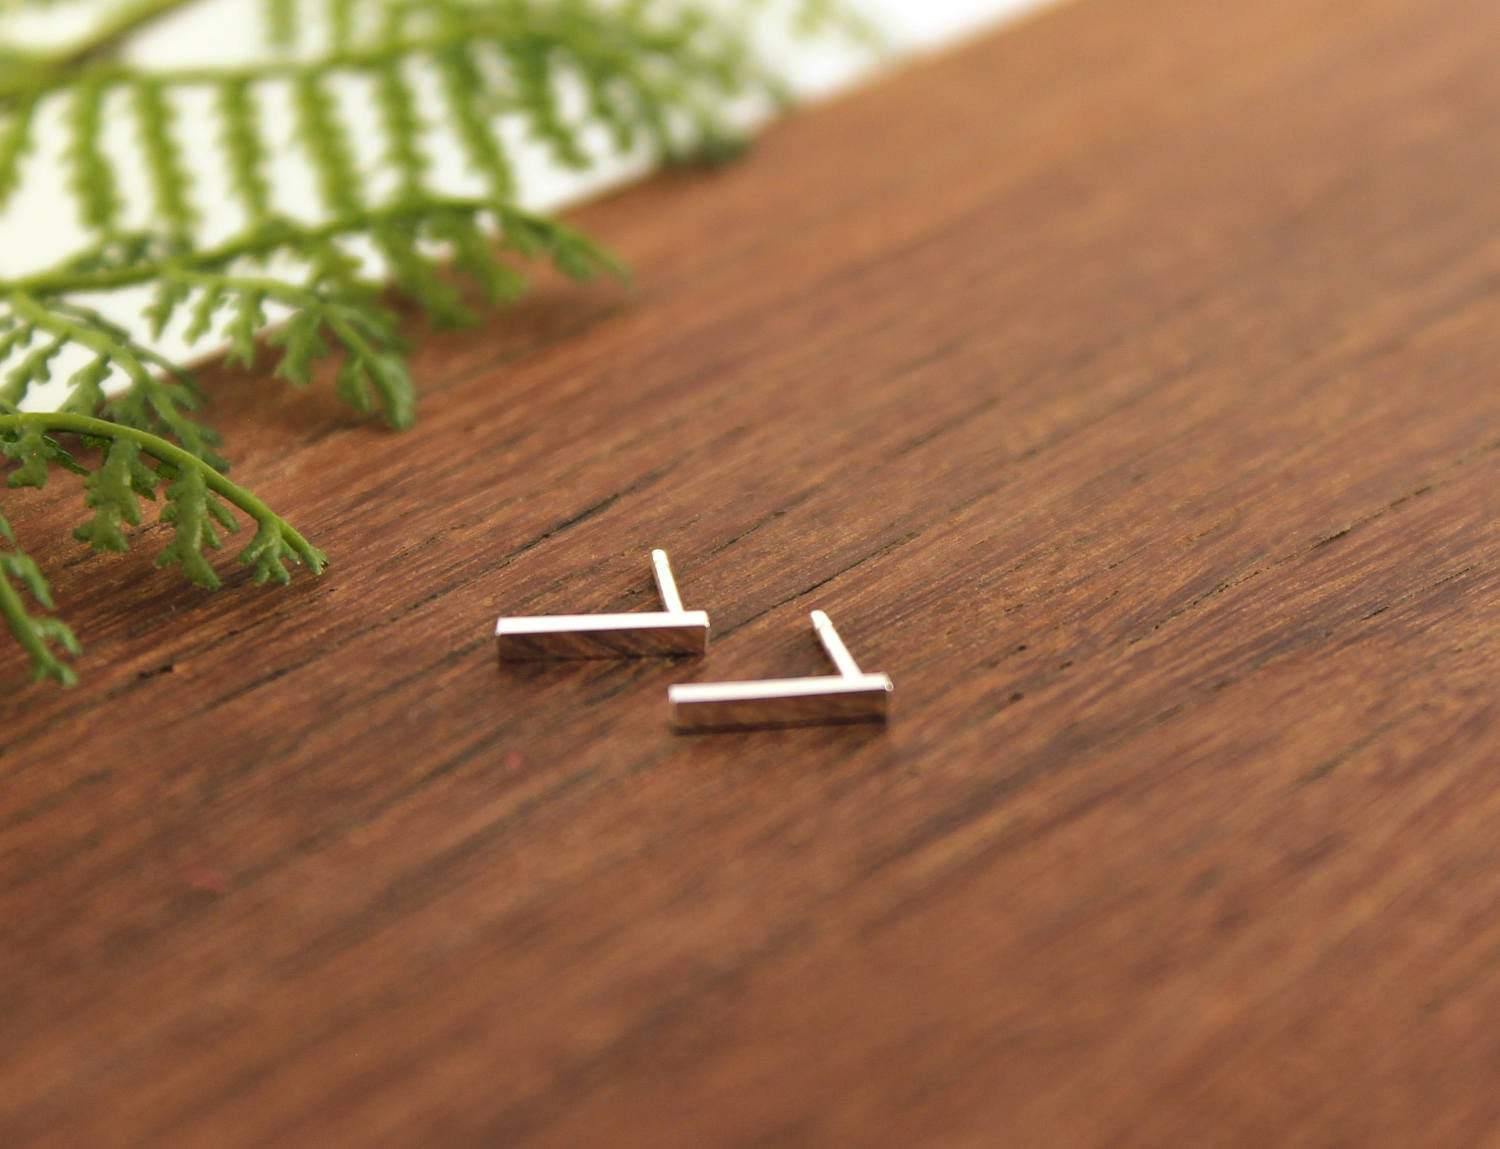 Long Bar Studs, Sterling Silver Square Bar Studs, Hand Crafted Silver, Simple Stylish Modern Earrings, Everyday Earrings, Geometric Studs - Sweet November Jewelry